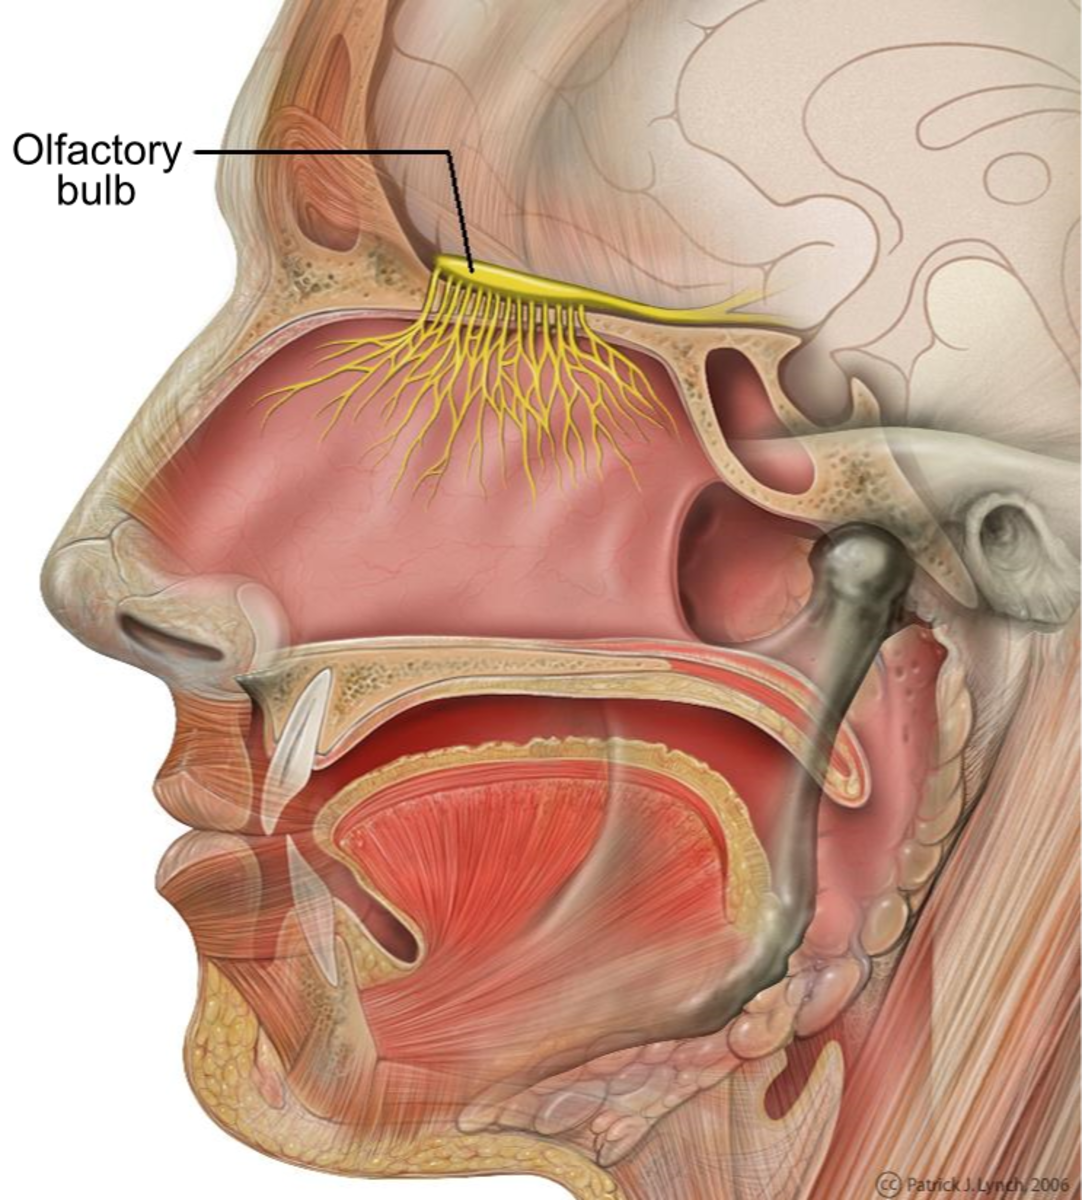 The olfactory bulb may play a role in Parkinson's disease.